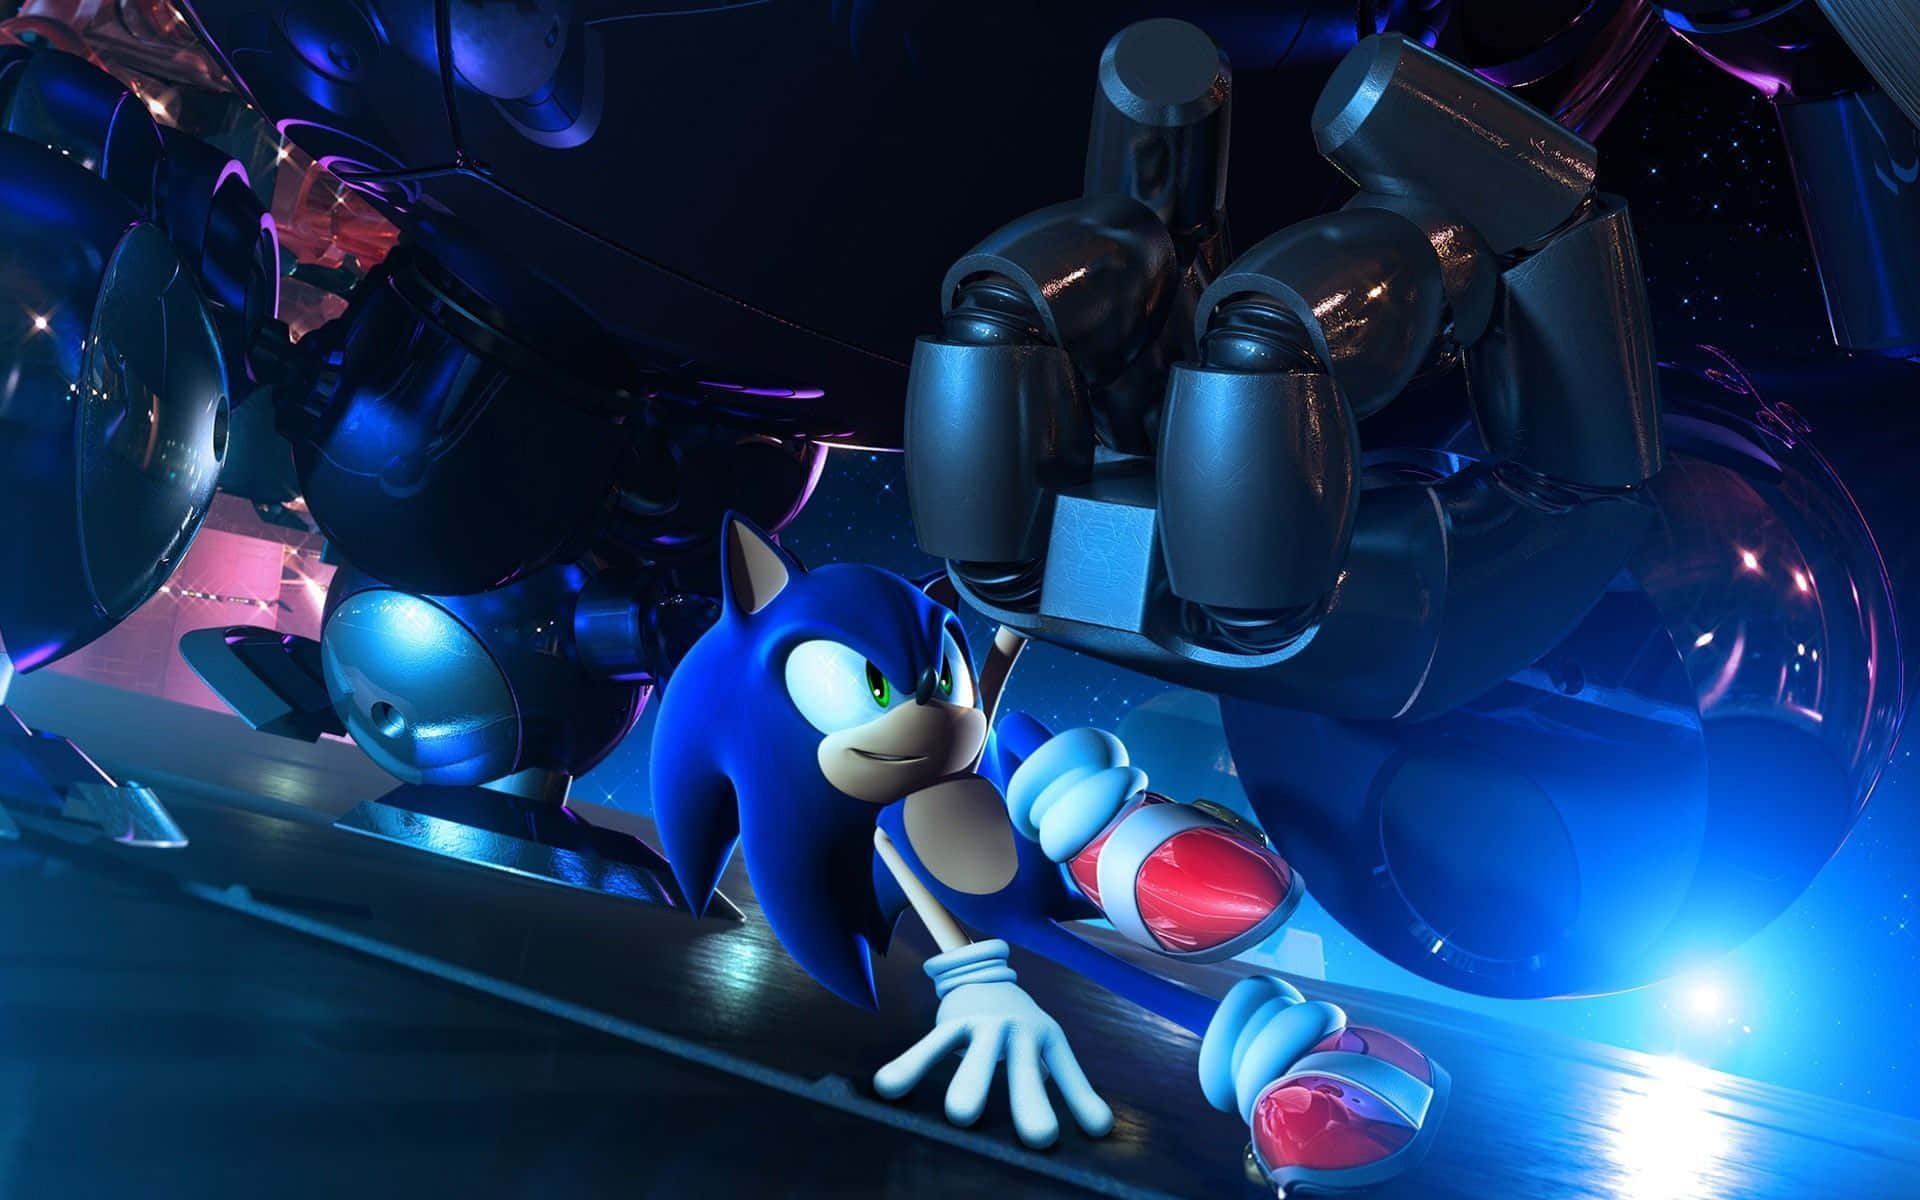 Sonic The Hedgehog zooms through in 4K Wallpaper